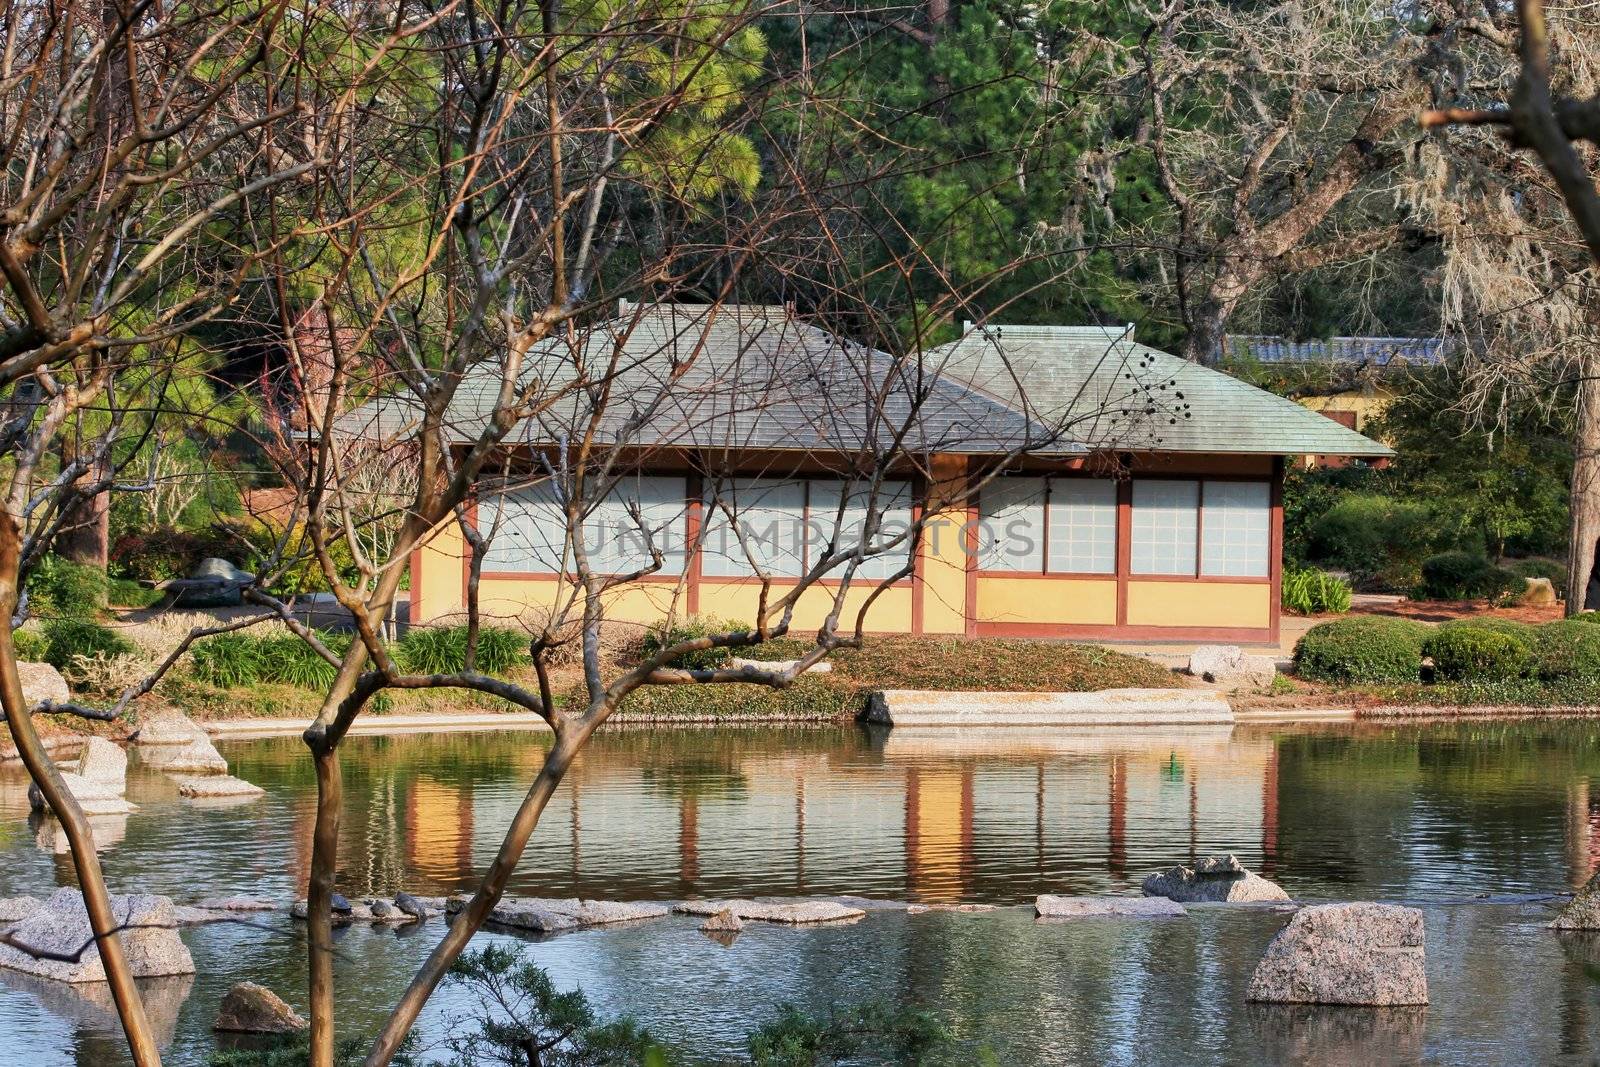 A Japanese Tea House setting at the edge of a refection pond